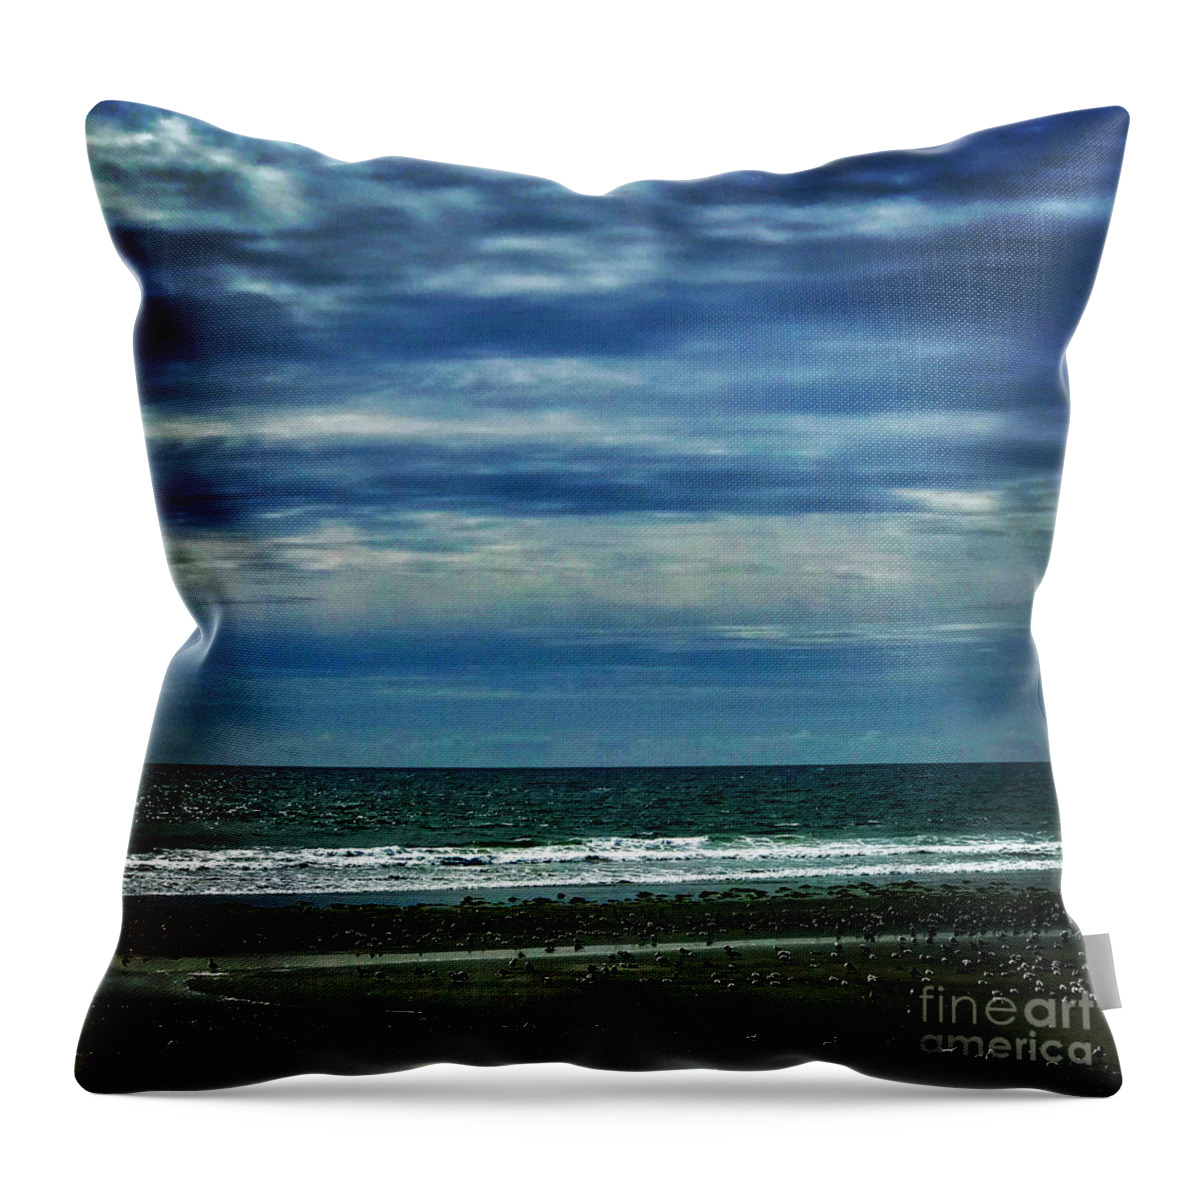 South Bend Throw Pillow featuring the photograph South Bend Sky by Suzanne Lorenz